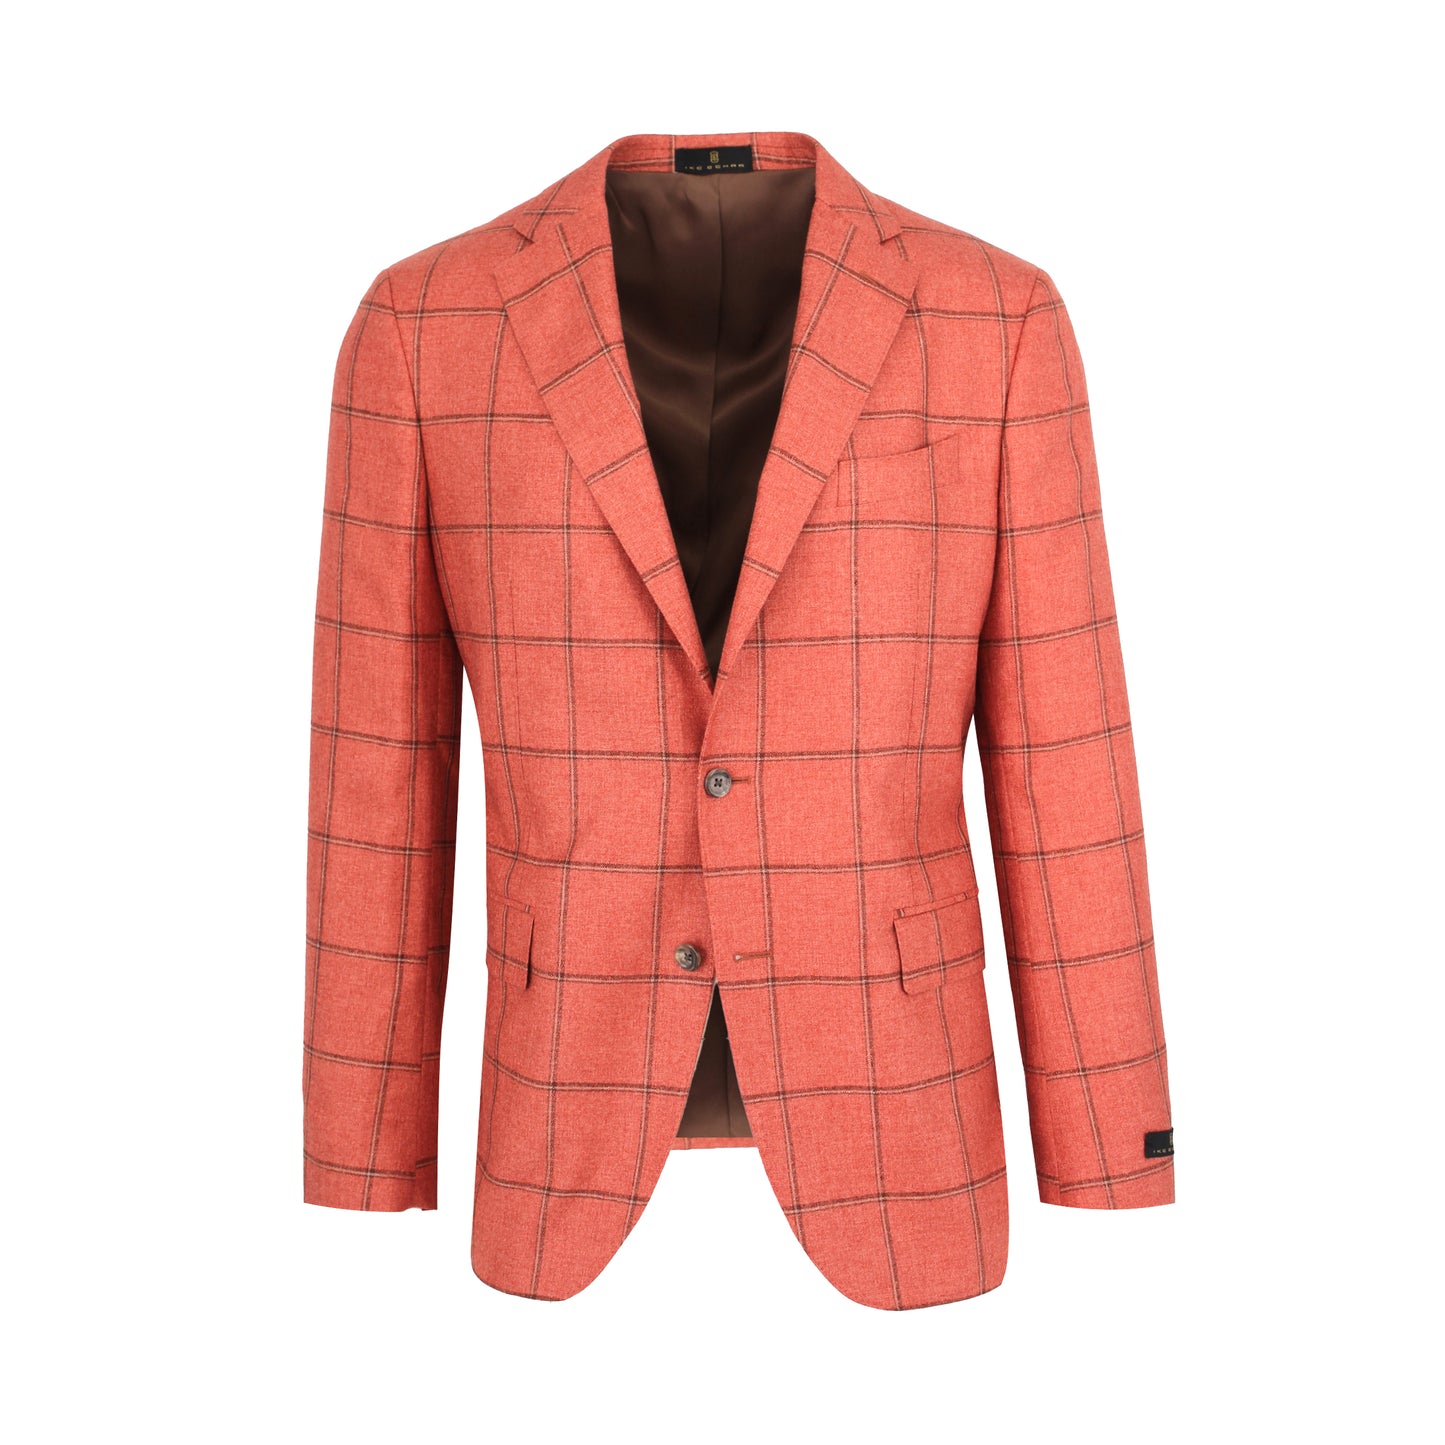 Coral with Brown Windowpane Silk & Cashmere Sport Coat